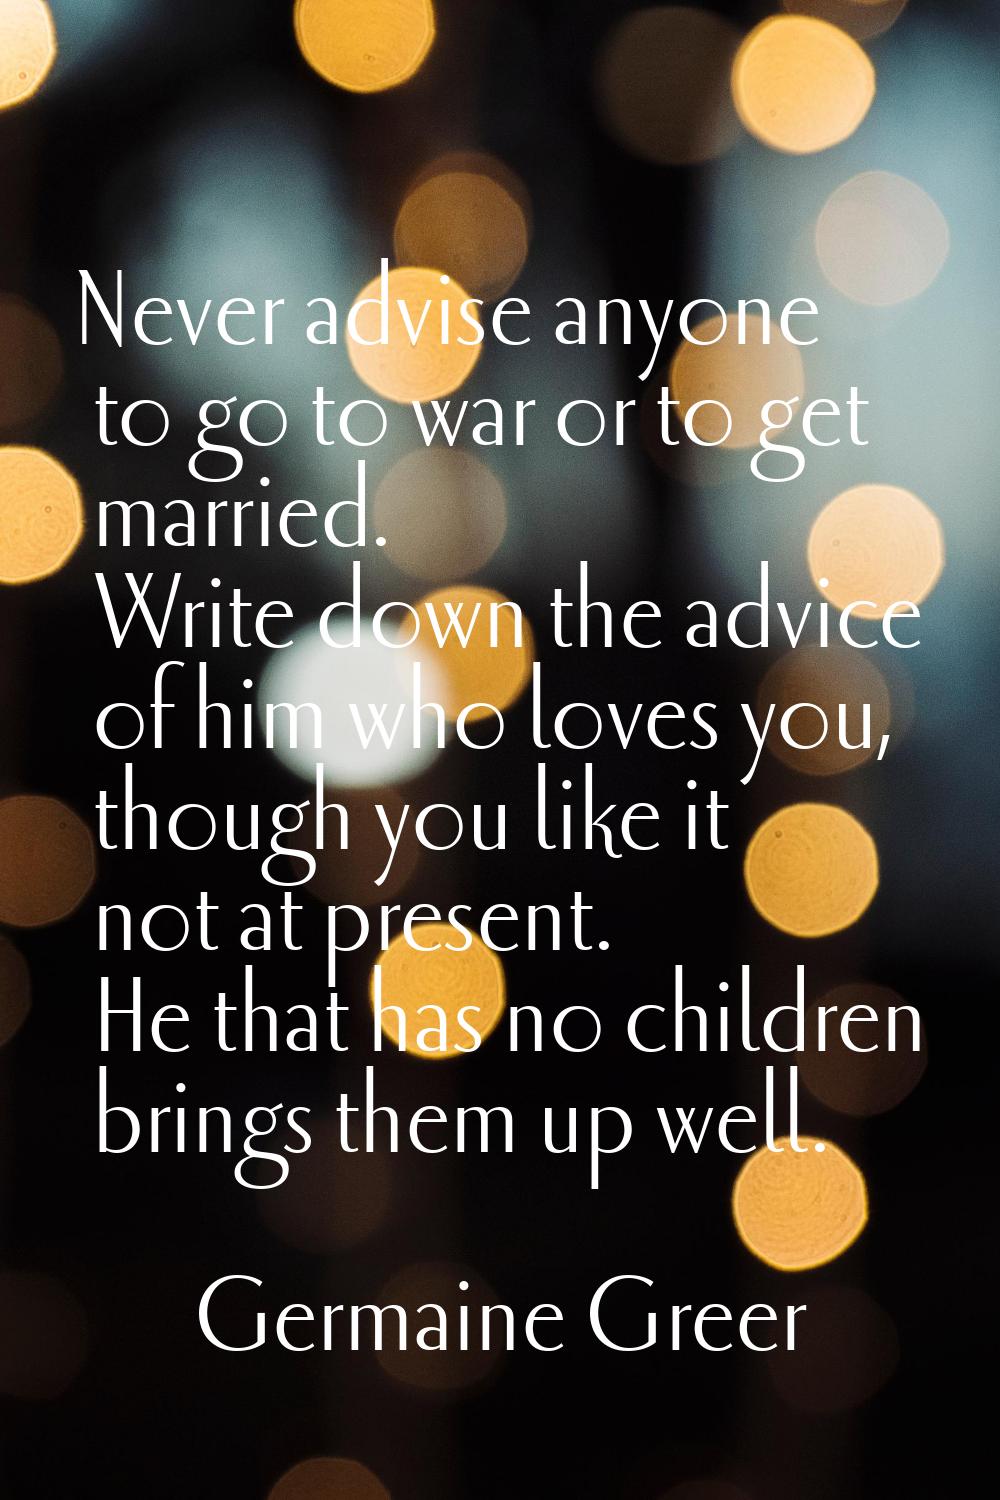 Never advise anyone to go to war or to get married. Write down the advice of him who loves you, tho